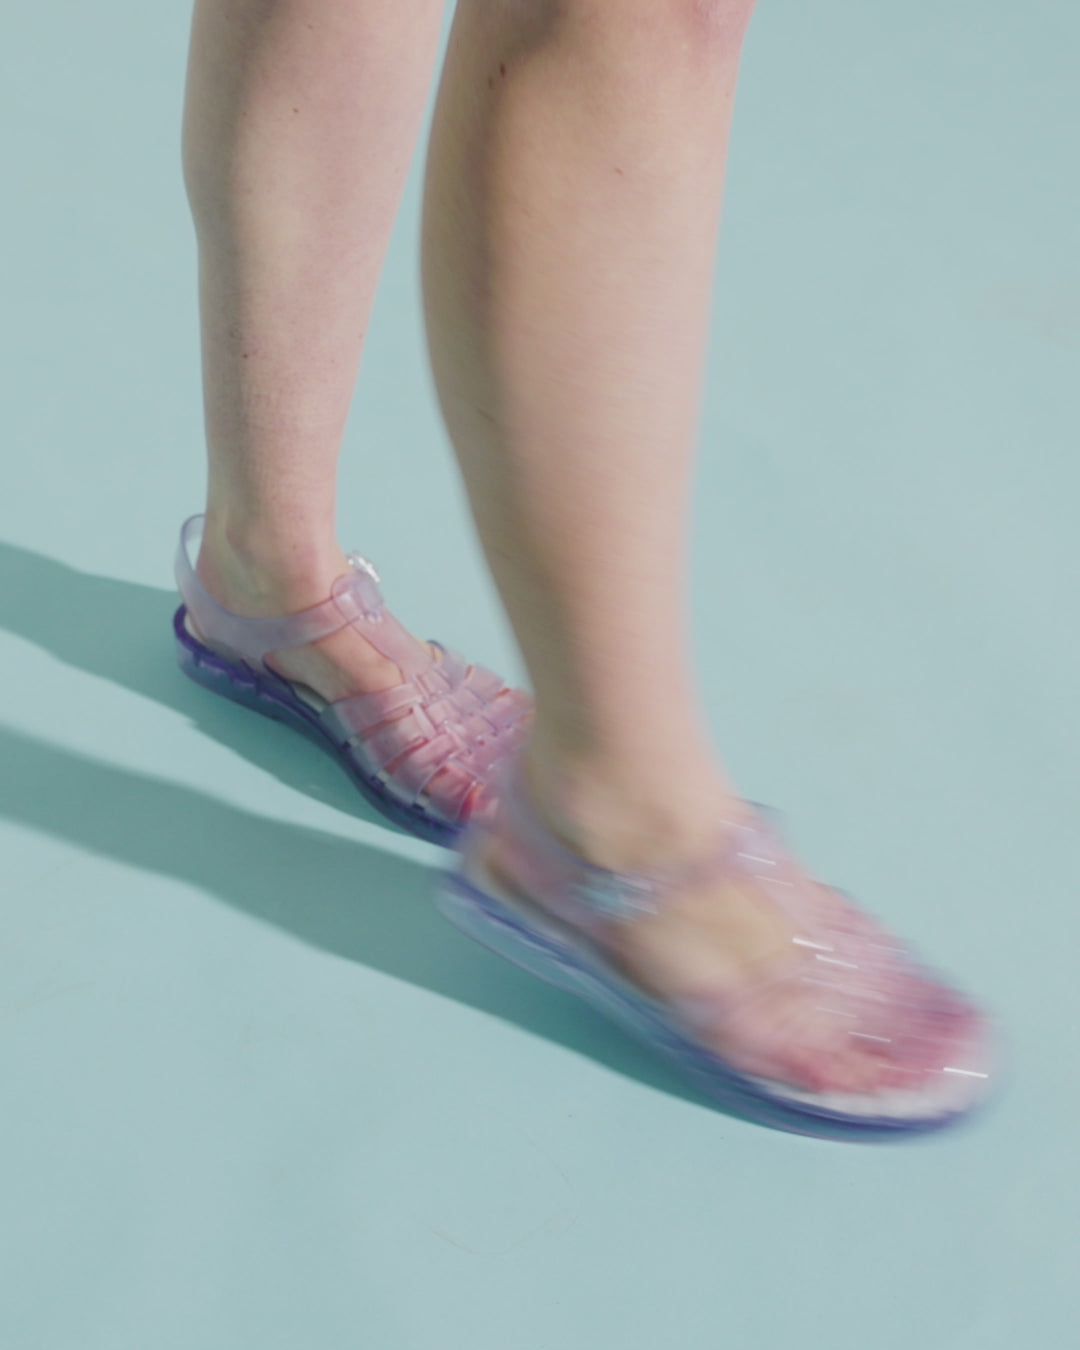 Video with no sound of a model's legs wearing a pair of clear Possession fisherman sandals.